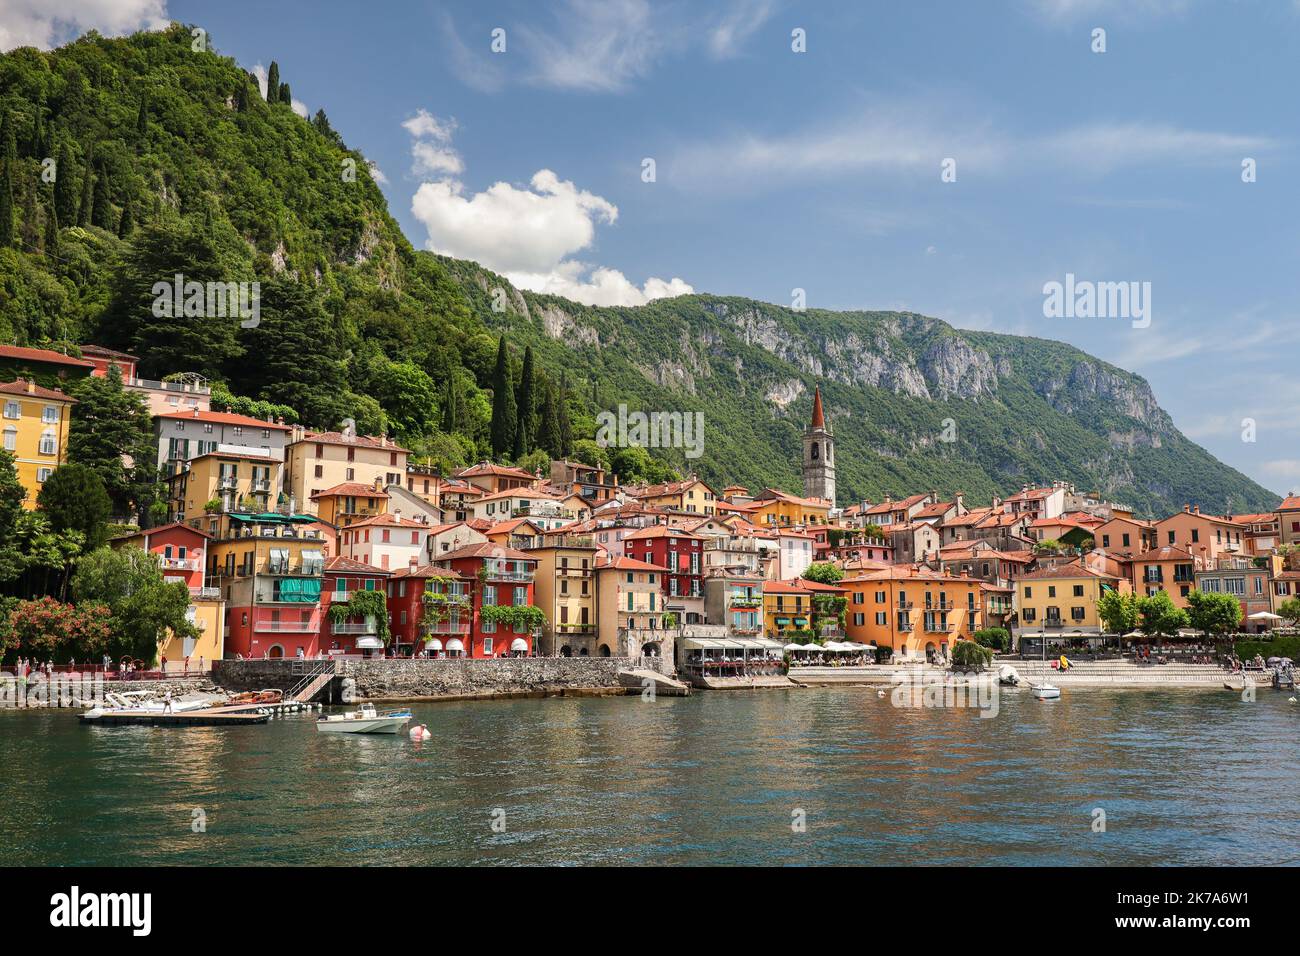 Colorful Varenna Town with Green Mountains. Picturesque Italian Comune with Lake Como during Summer Day. Stock Photo